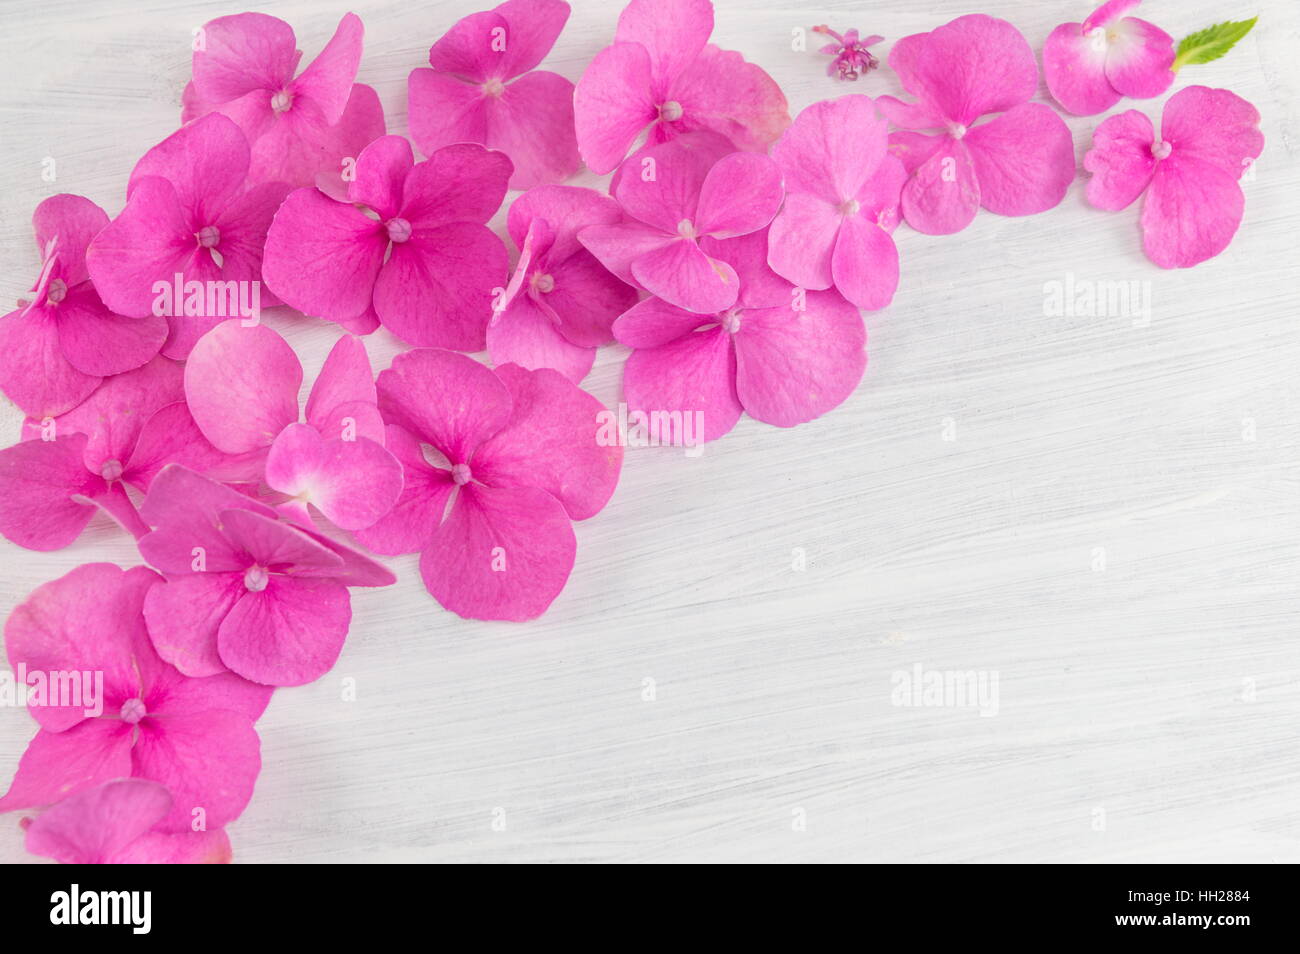 bunch of hortensia pink flowers on wooden background Stock Photo